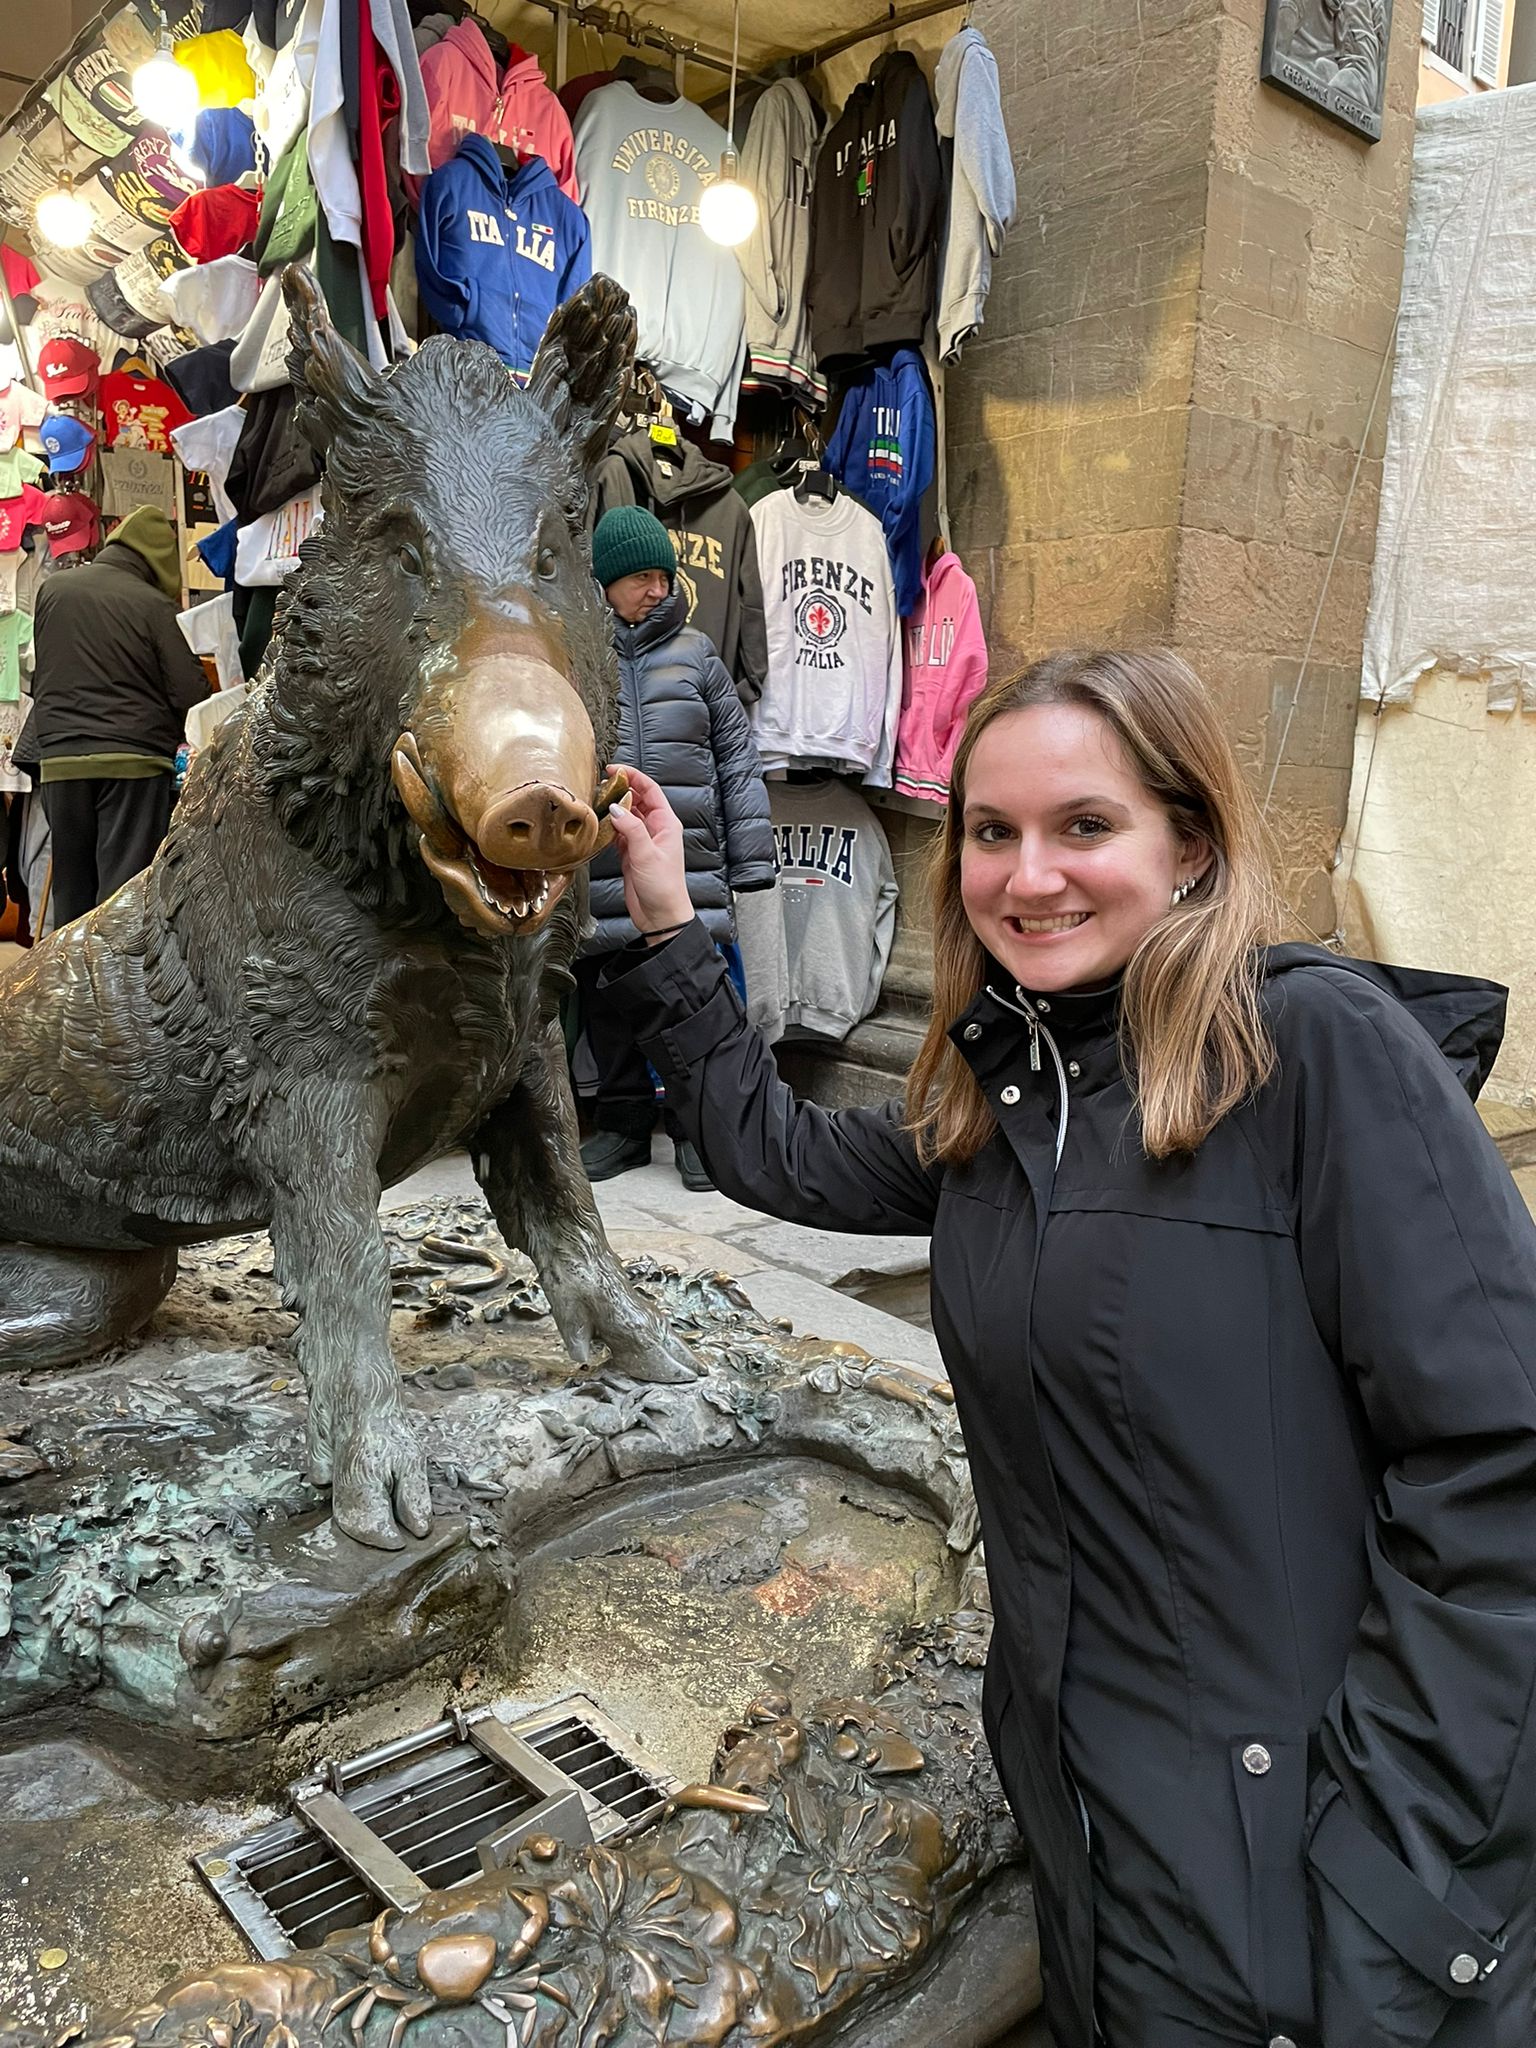 aifs abroad student studying abroad in florence, italy at famous boar statue